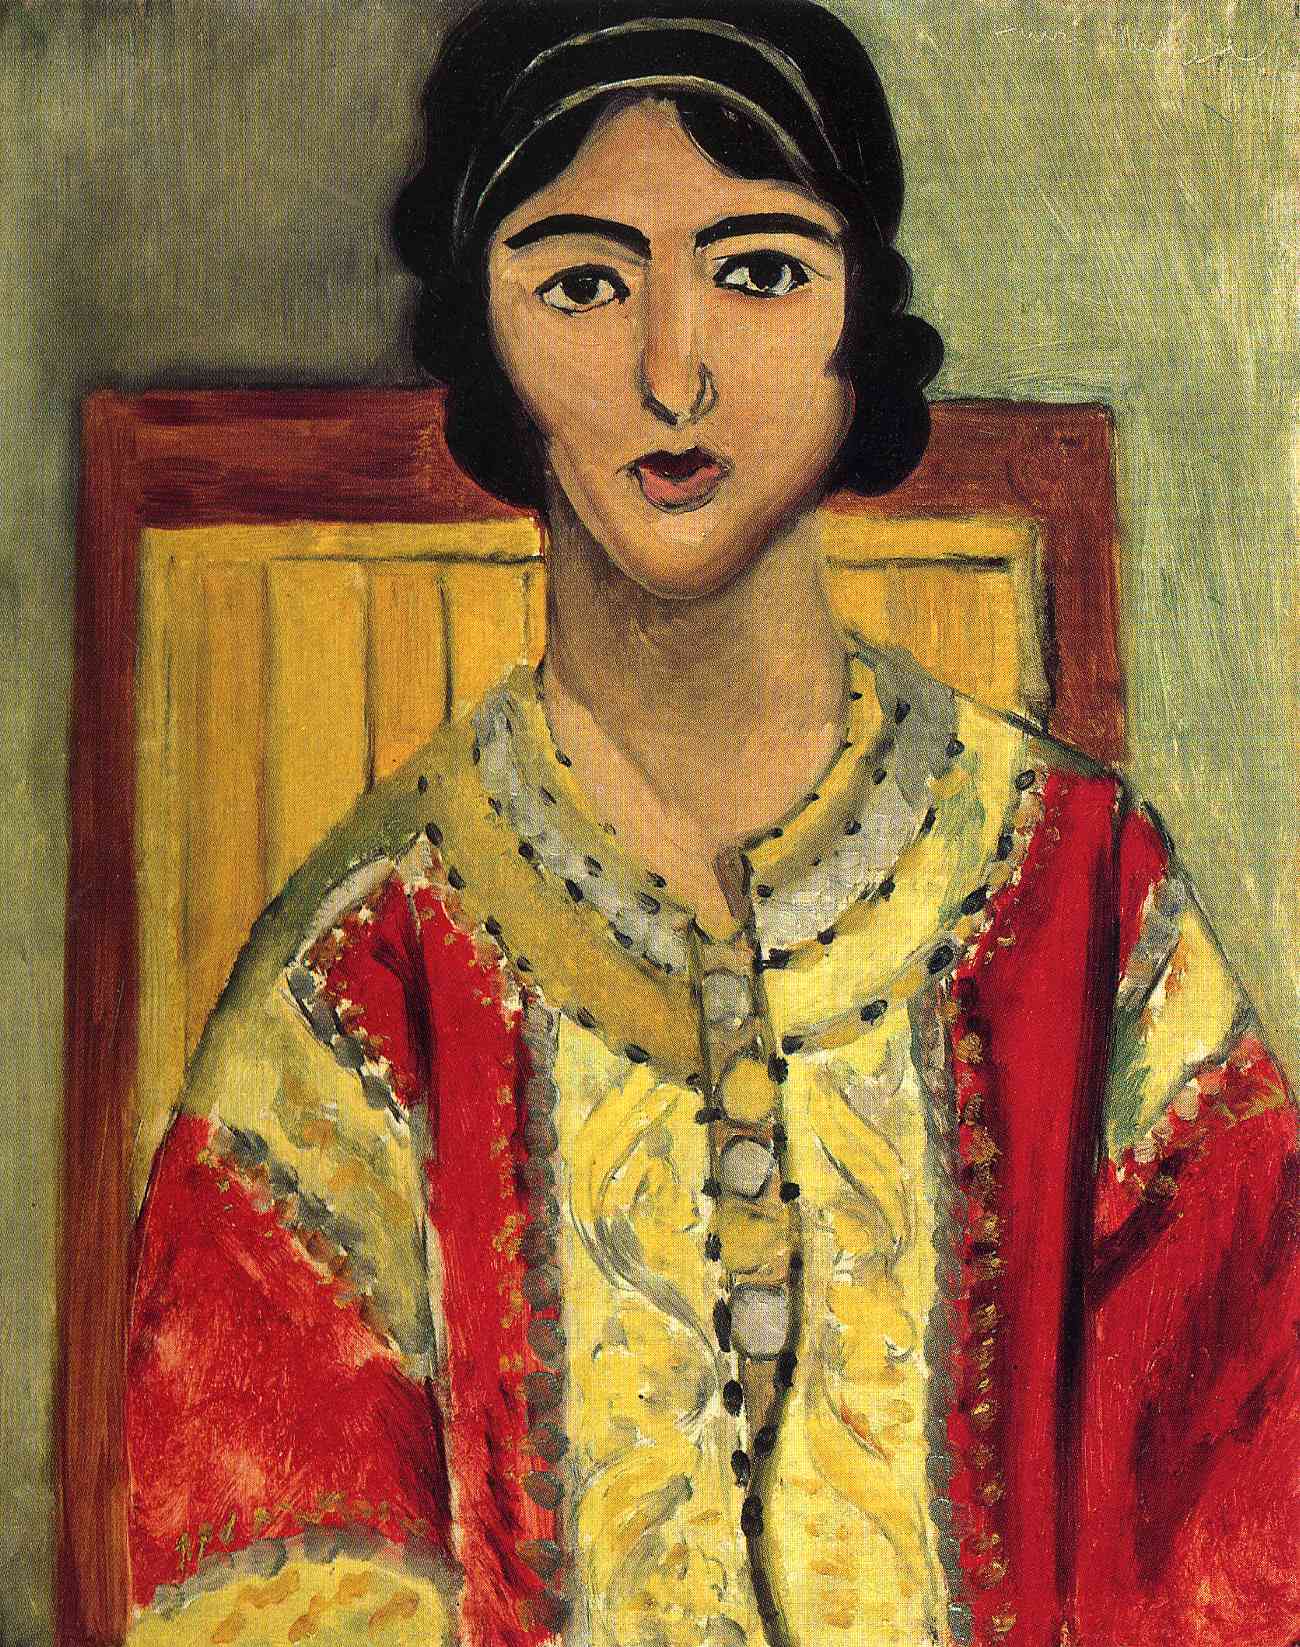 Lorette with a Red Dress (1917).